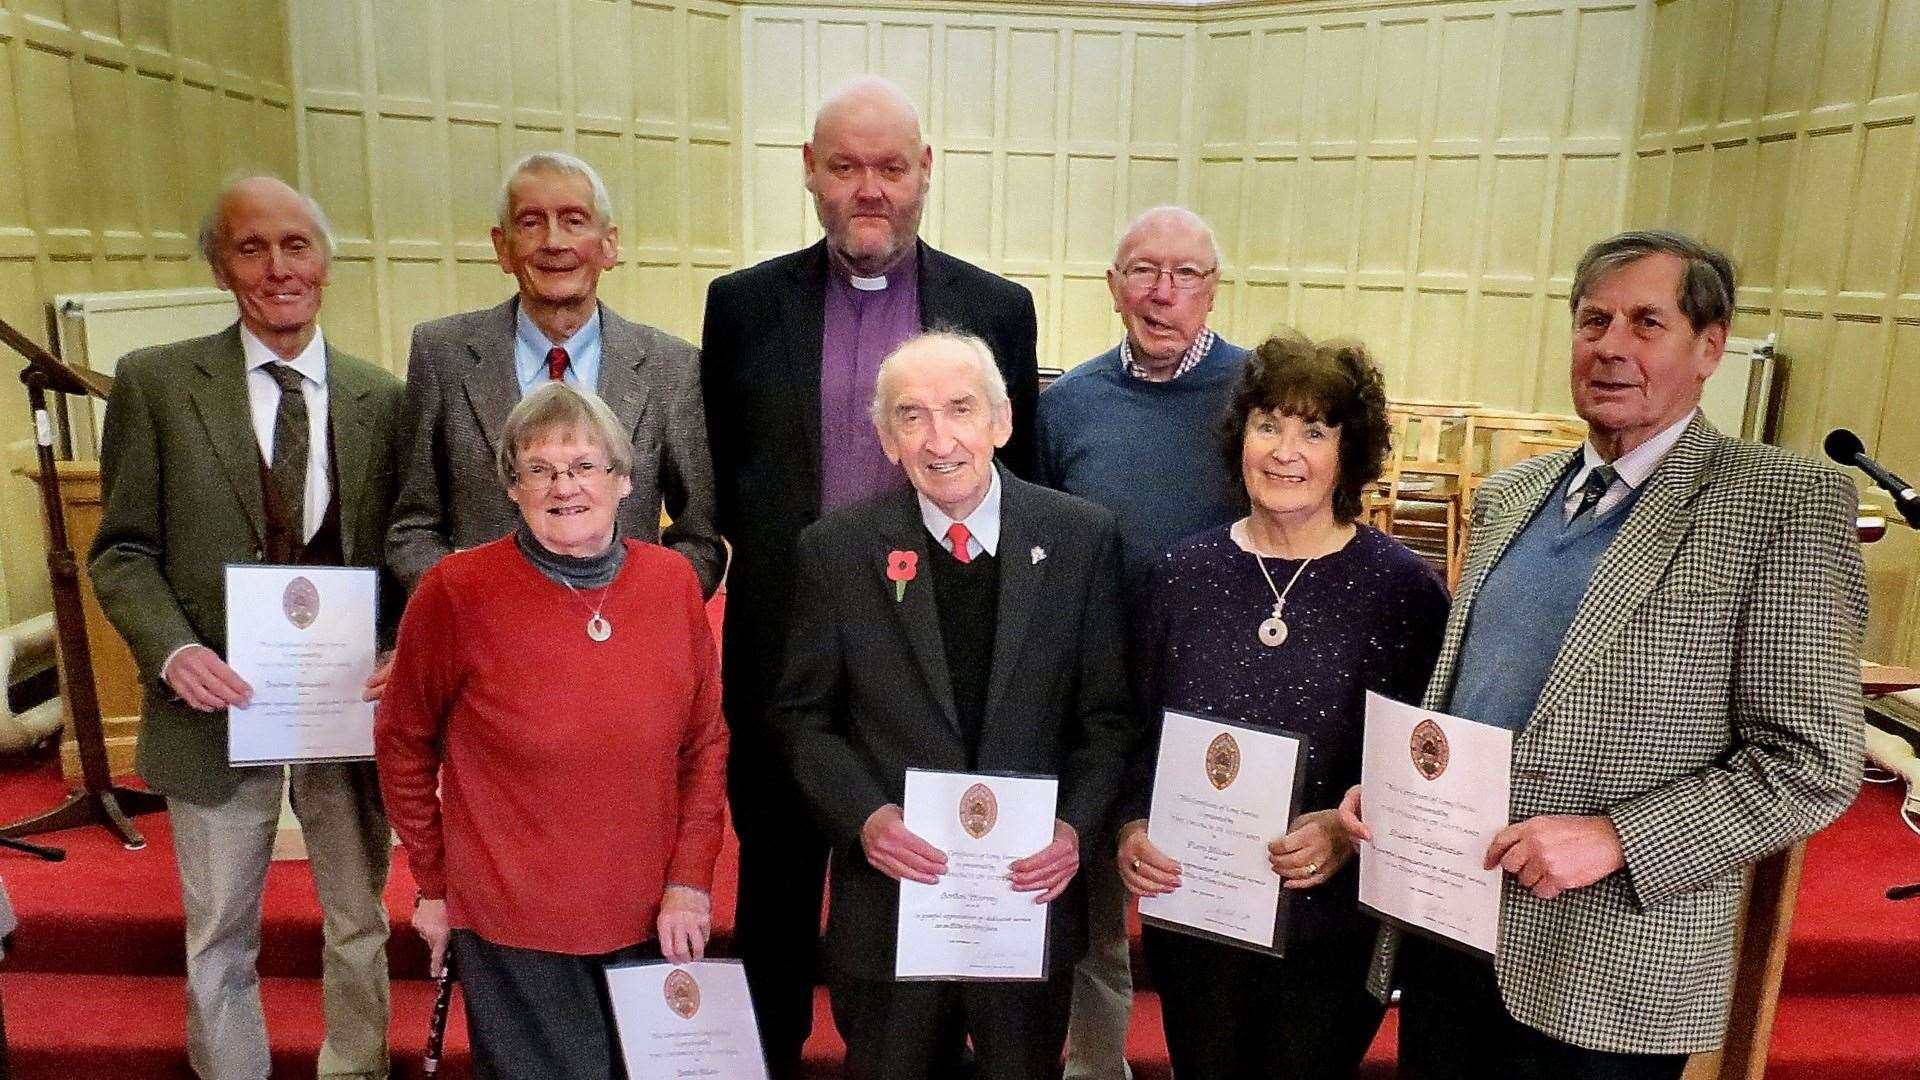 The elders were presented with their certificates by locum minister Rev James Bissett.